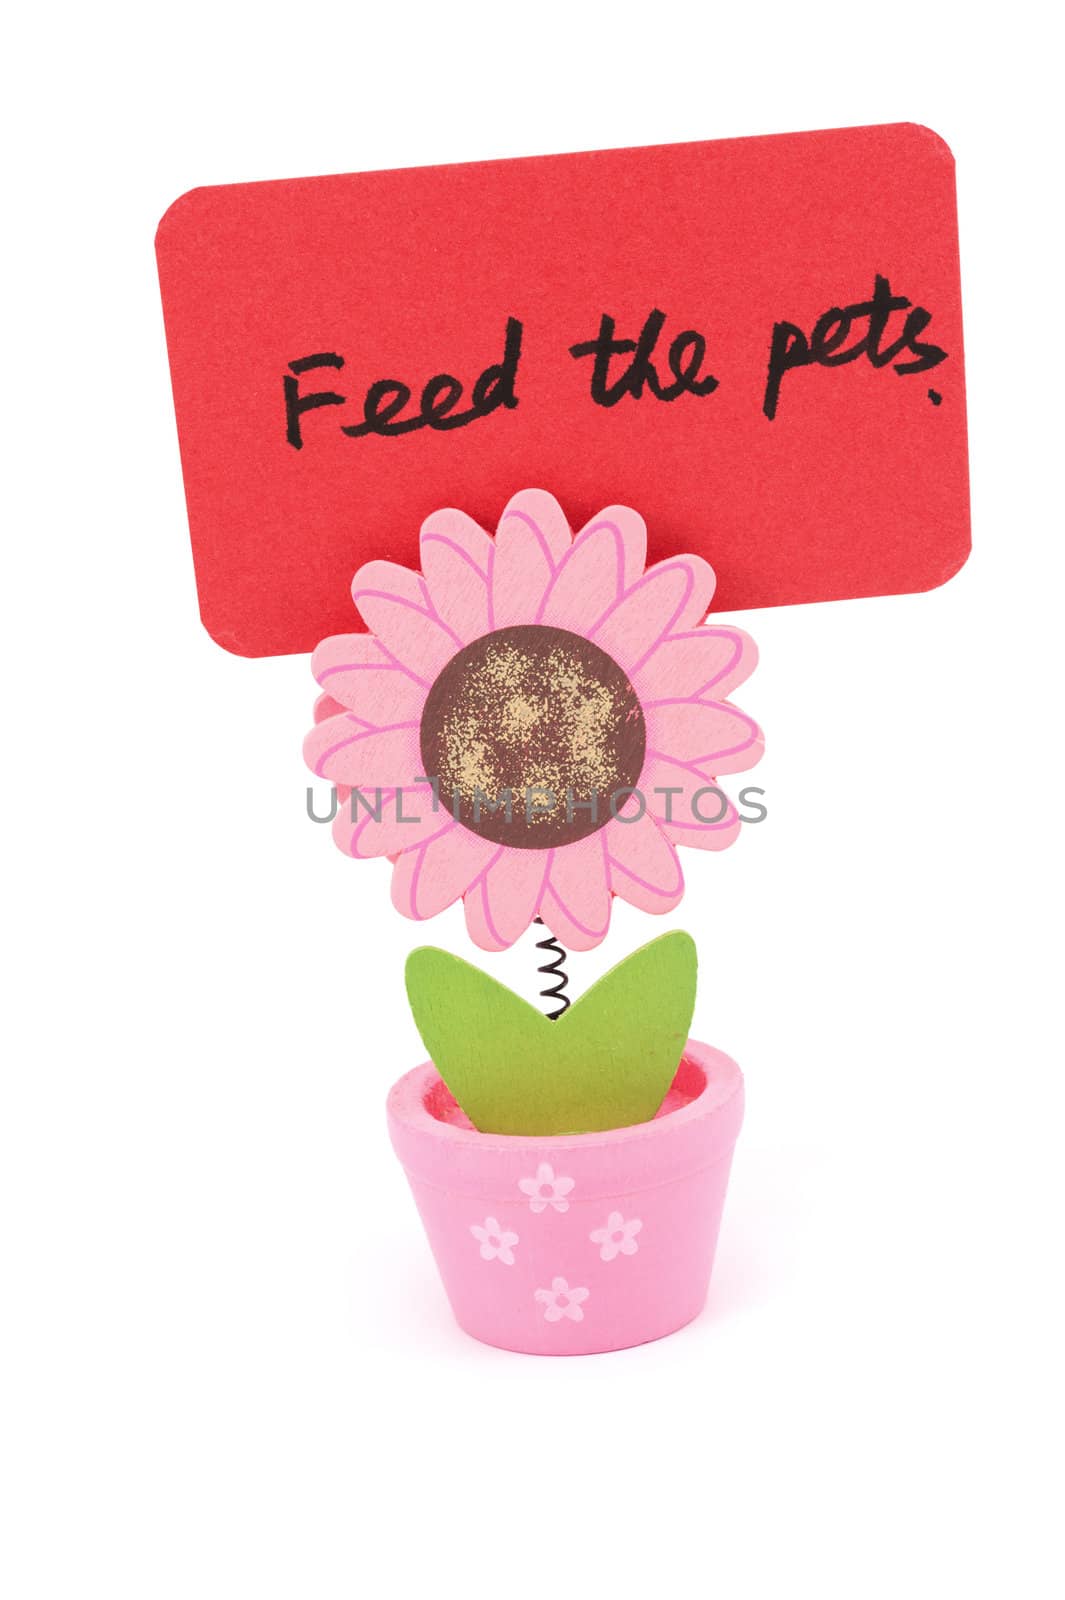 Feed the pets words written on red paper of sun flower pot clip